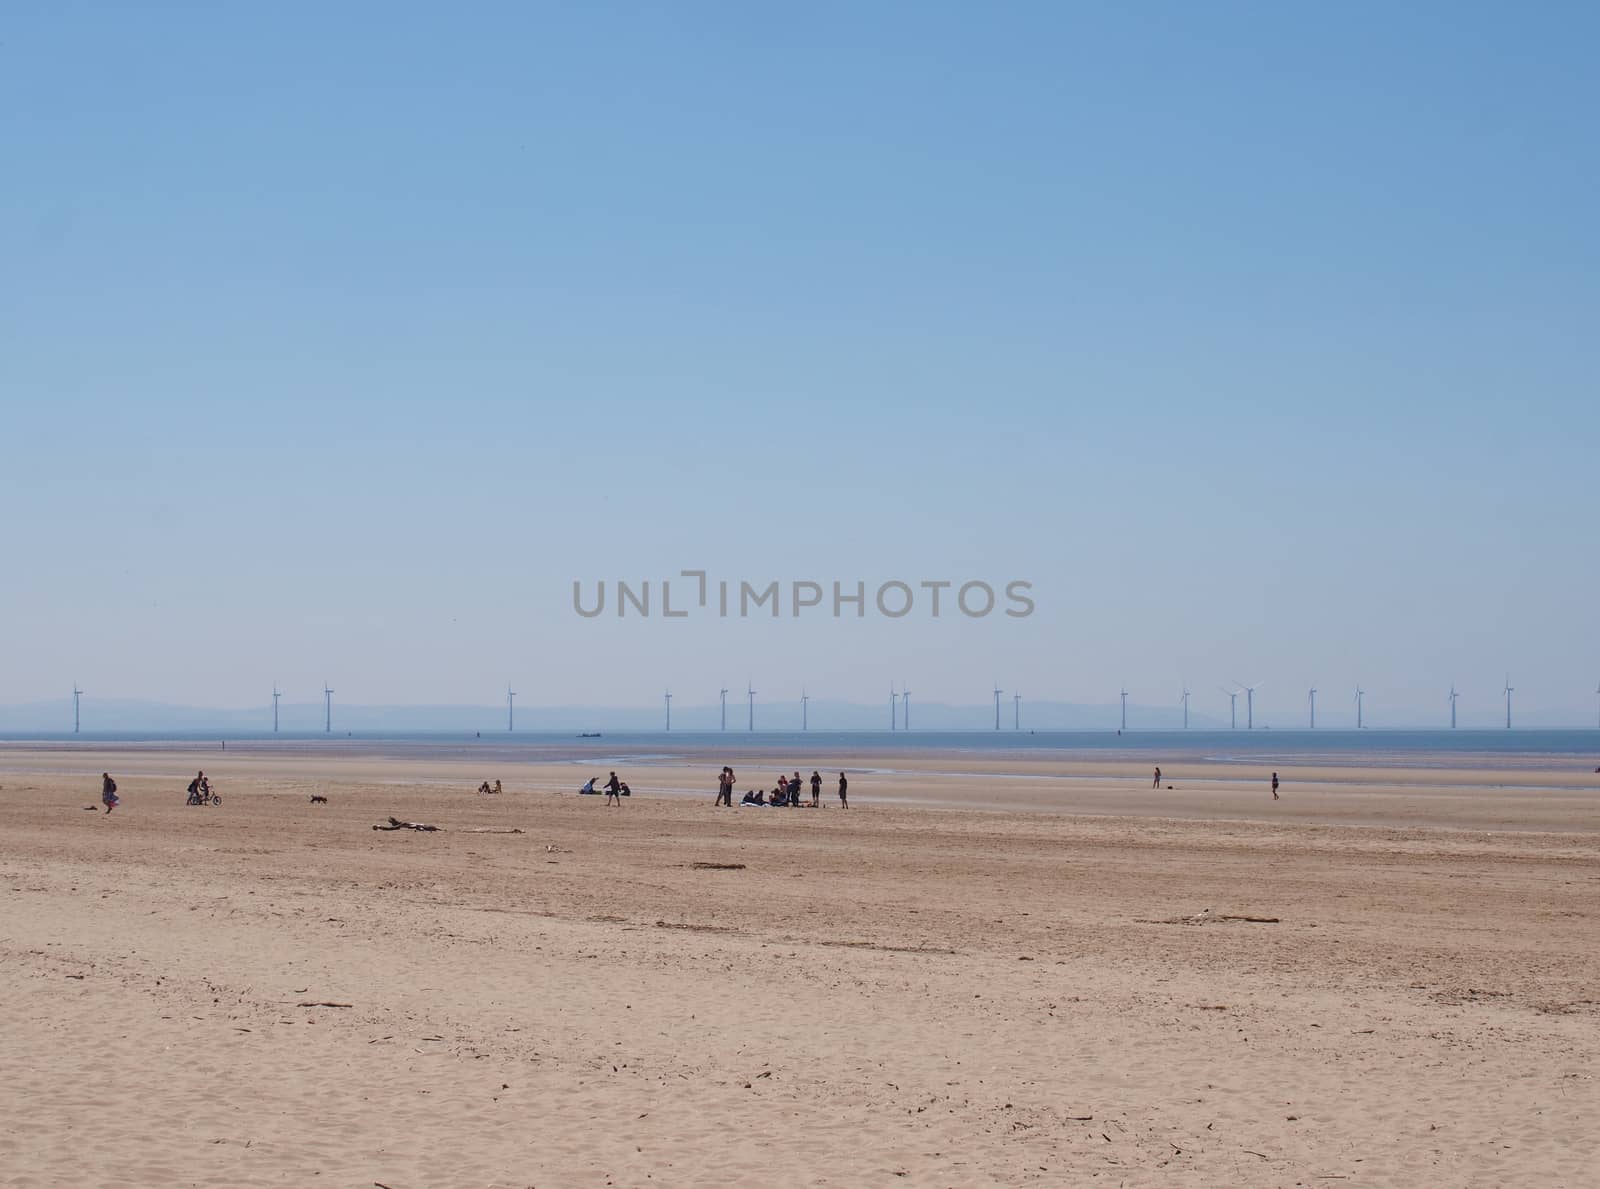 a view of a large flat sand covered summer beach in formby merseyside with unrecognizable people in the middle distance and windmills on the horizon